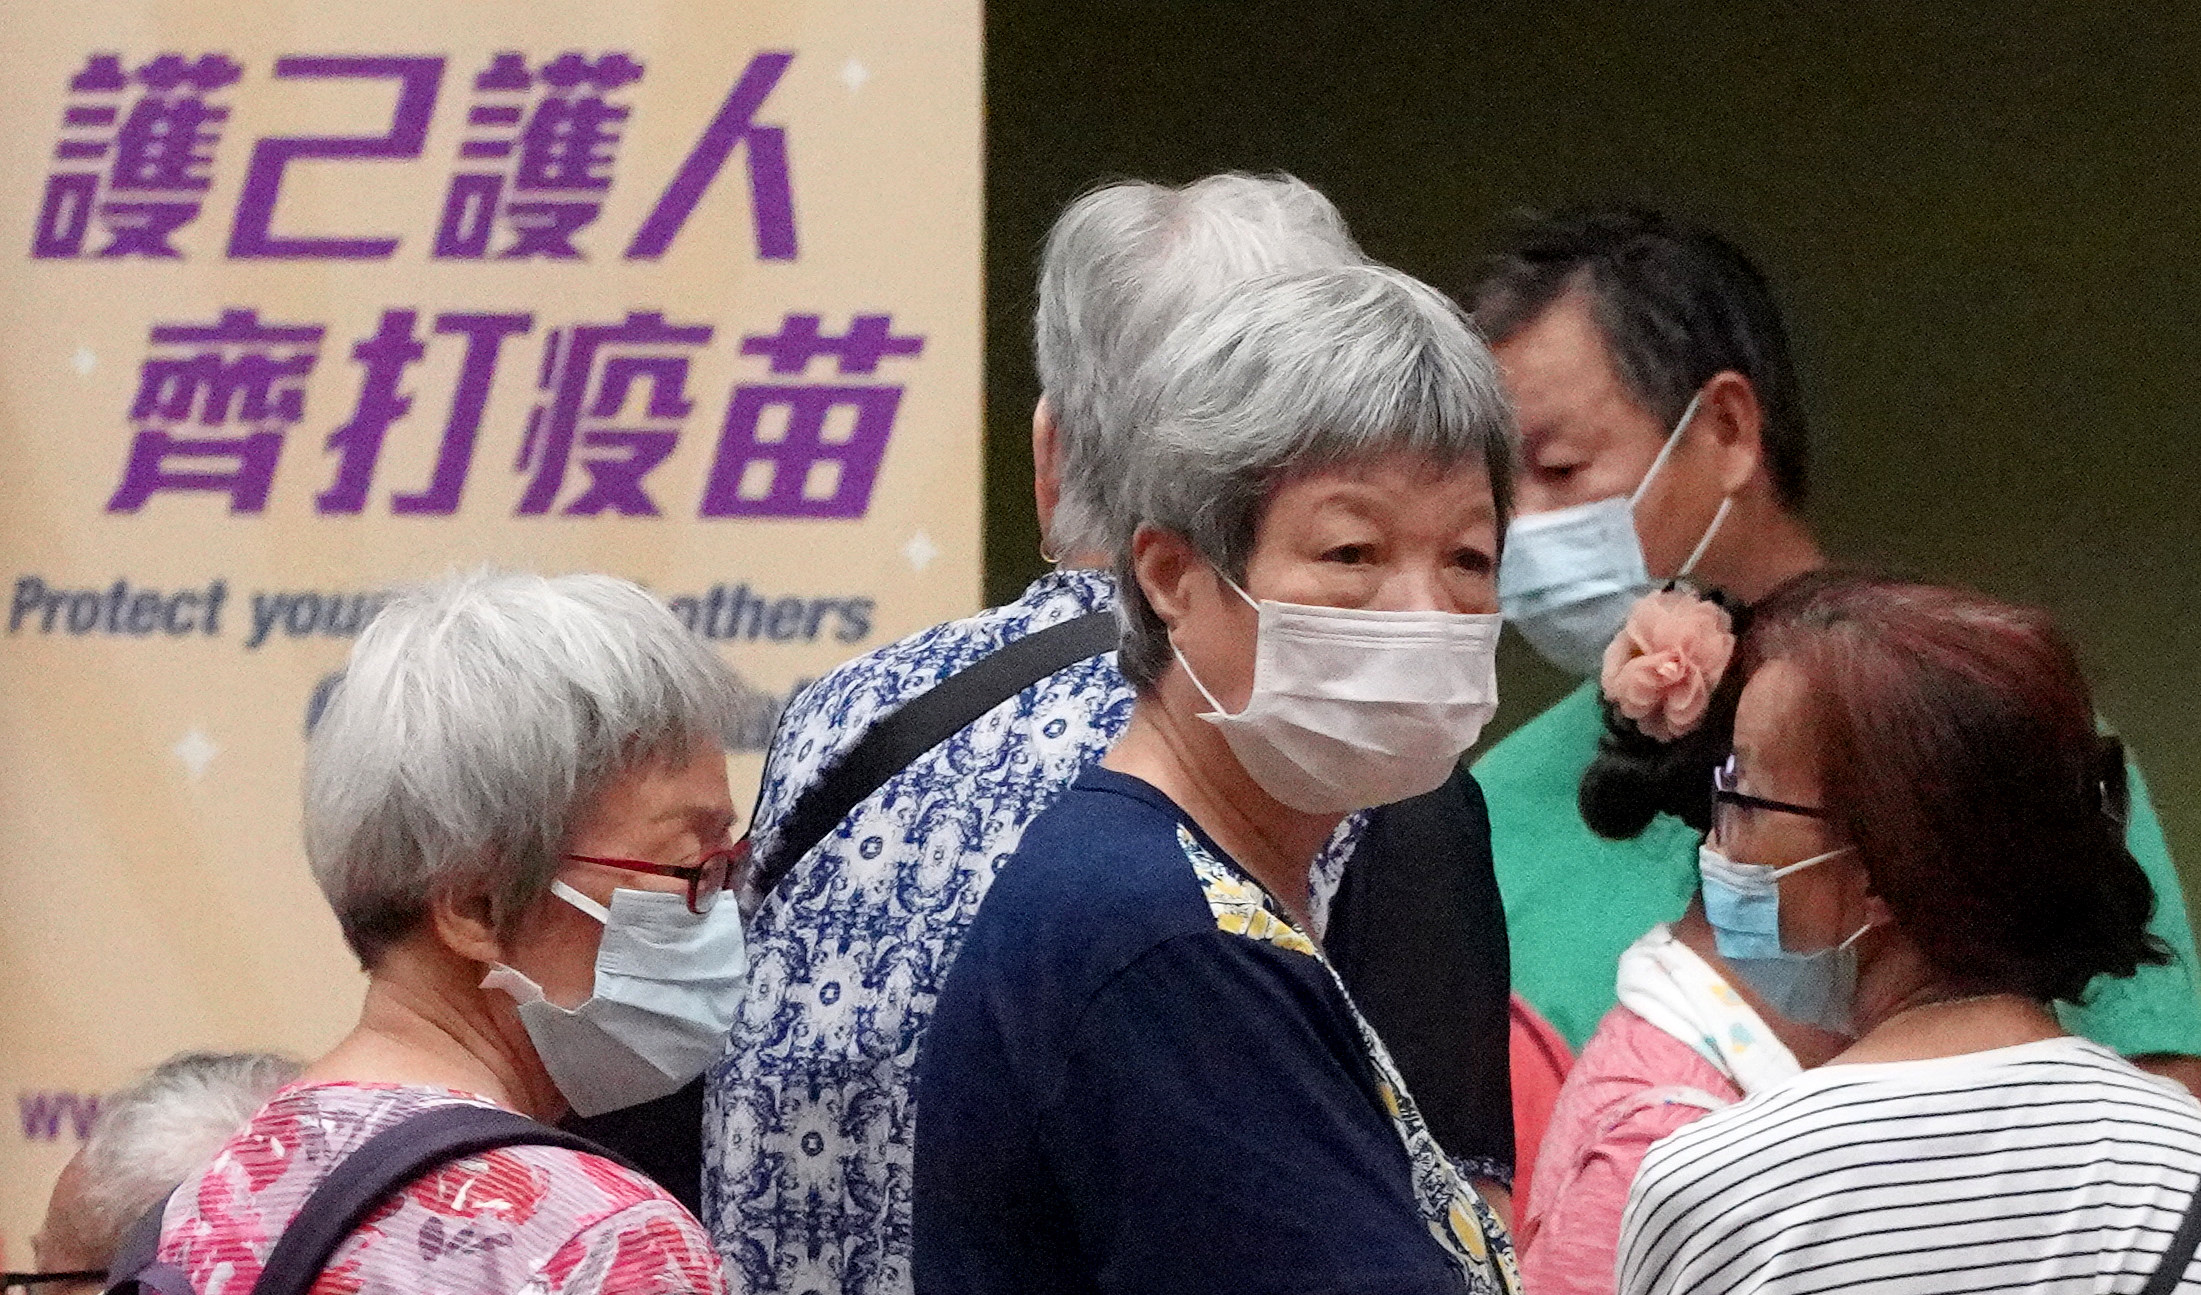 The government’s outreach vaccination team helps elderly residents at Cheung Fat Estate Community Centre in Kwai Tsing district on October 11, 2021. Photo: Winson Wong 